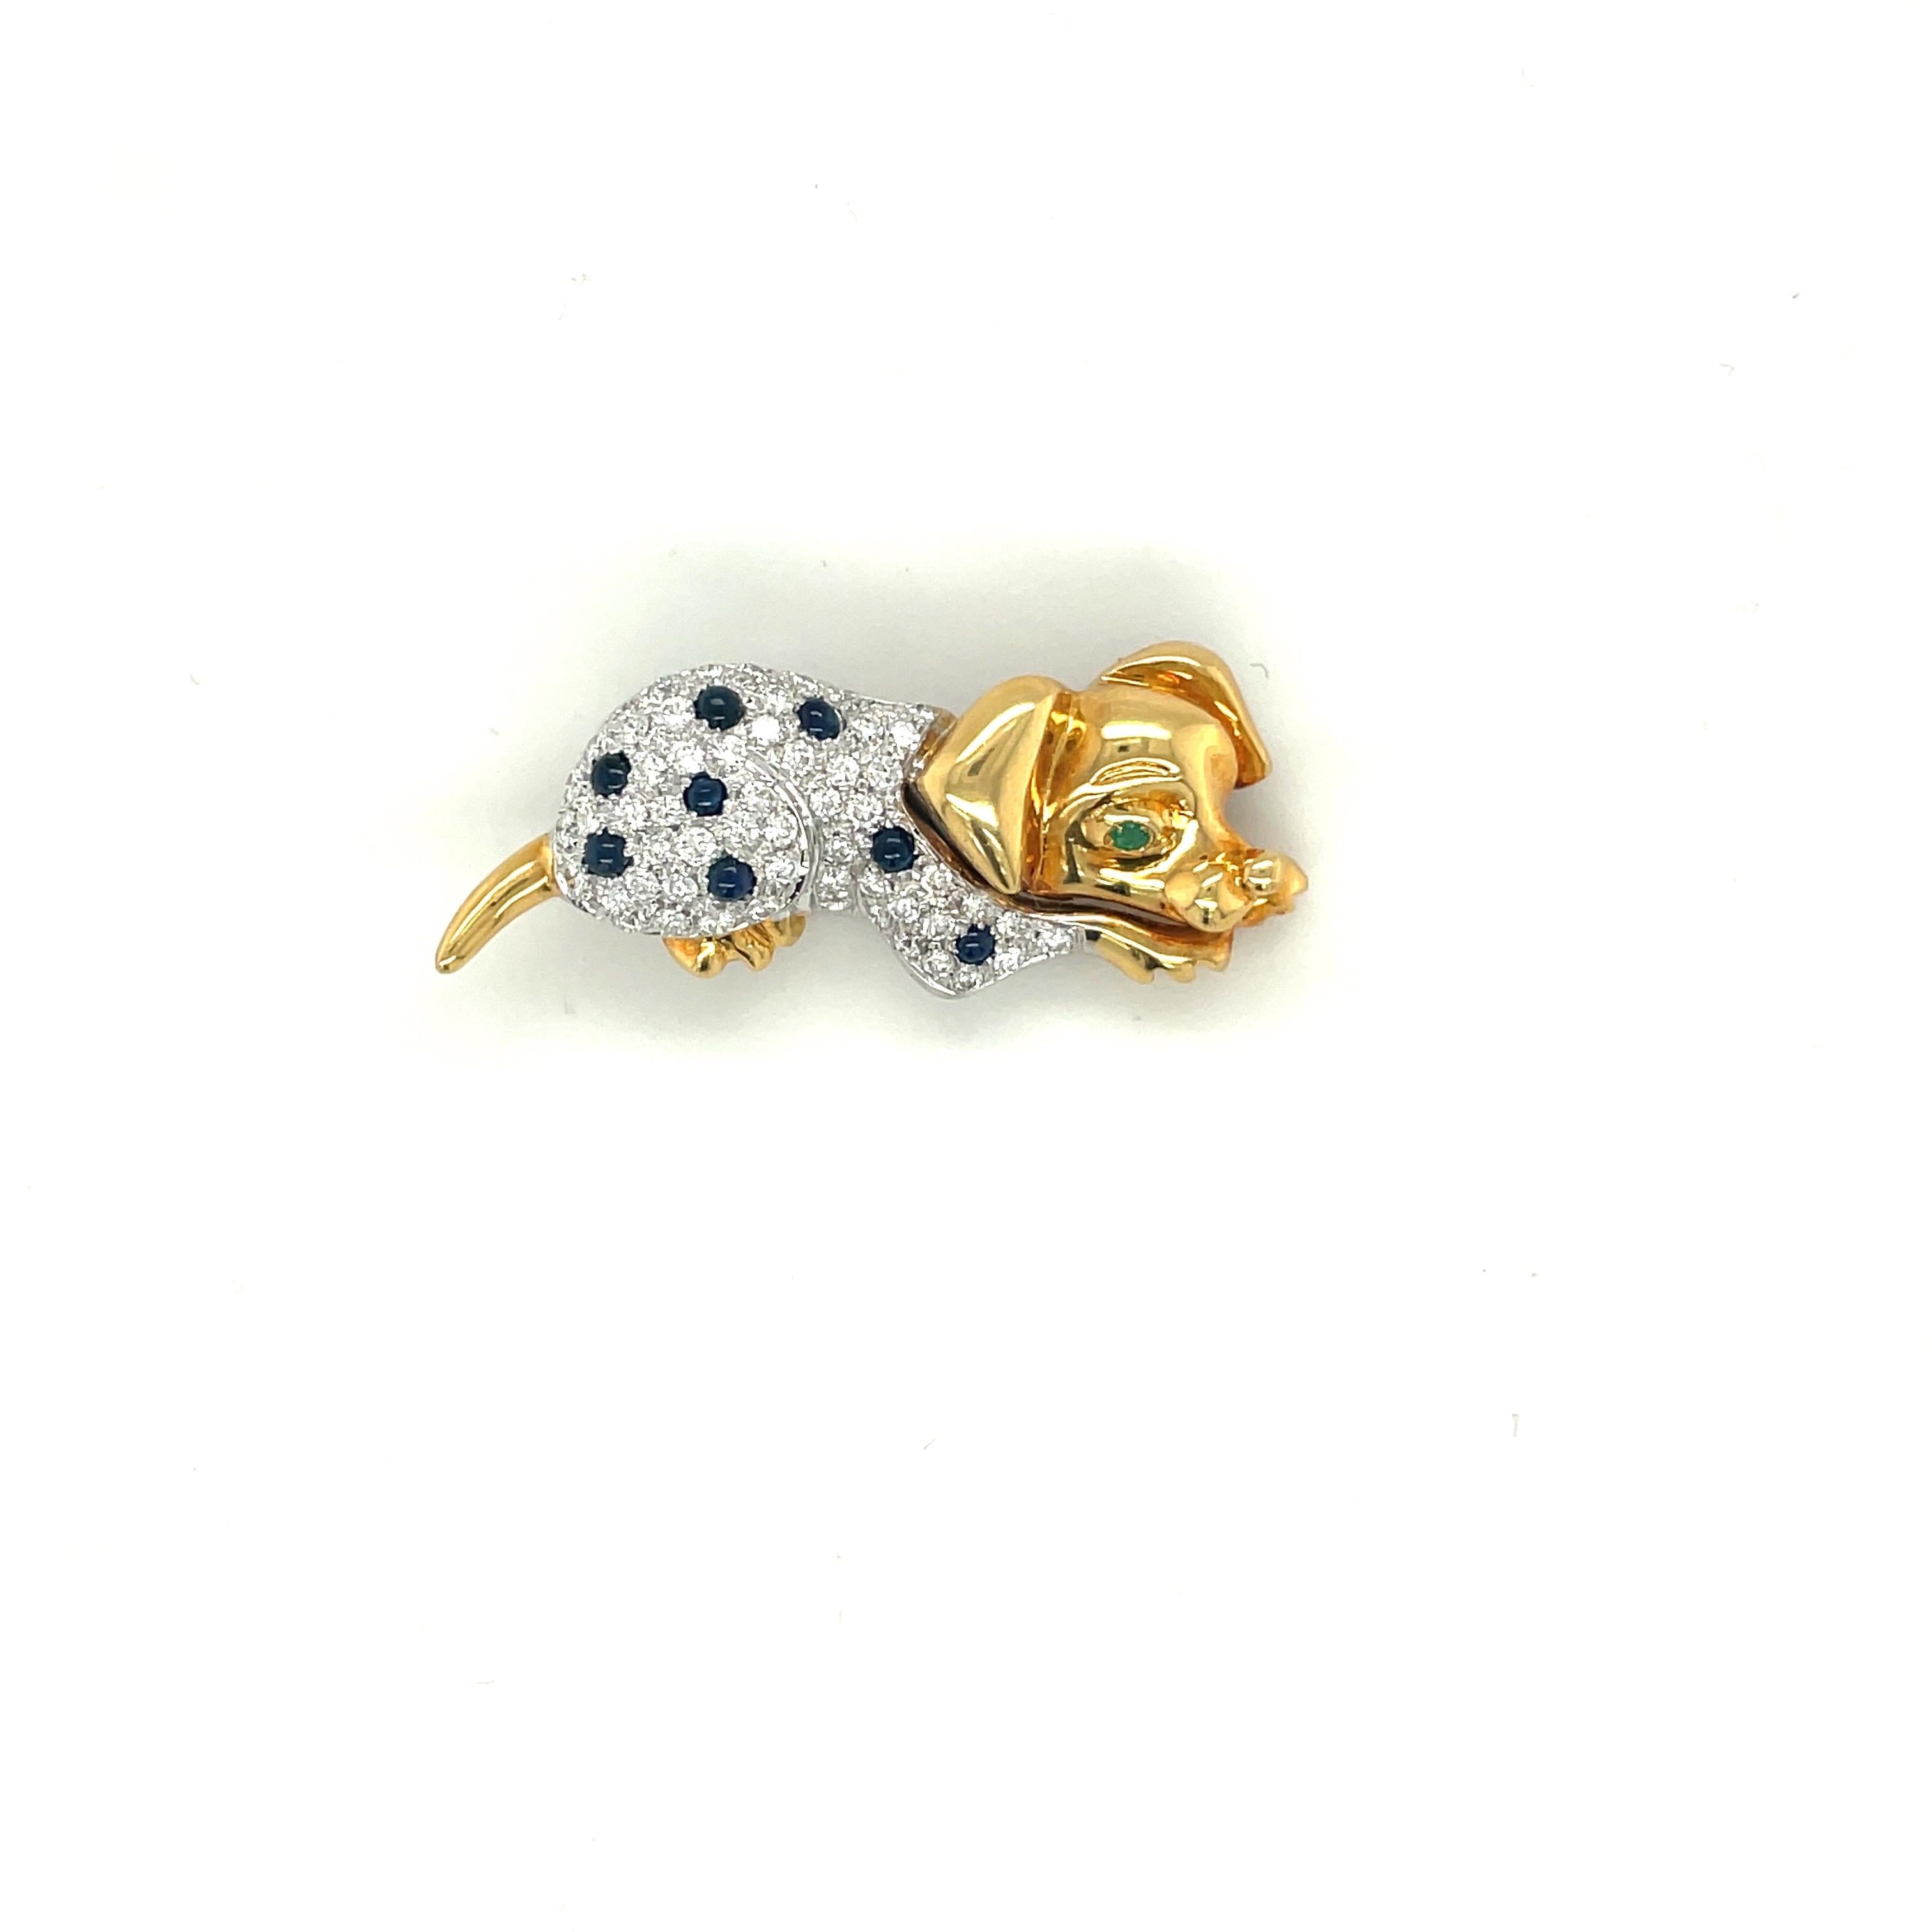 18 karat gold brooch designed as a dalmatian  sleeping dog  The white gold body is set with pave diamonds and scattered cabochon blue sapphires. The head and paws are shiny yellow gold and the eye is set with a round emerald.
Diamond weight 0.98